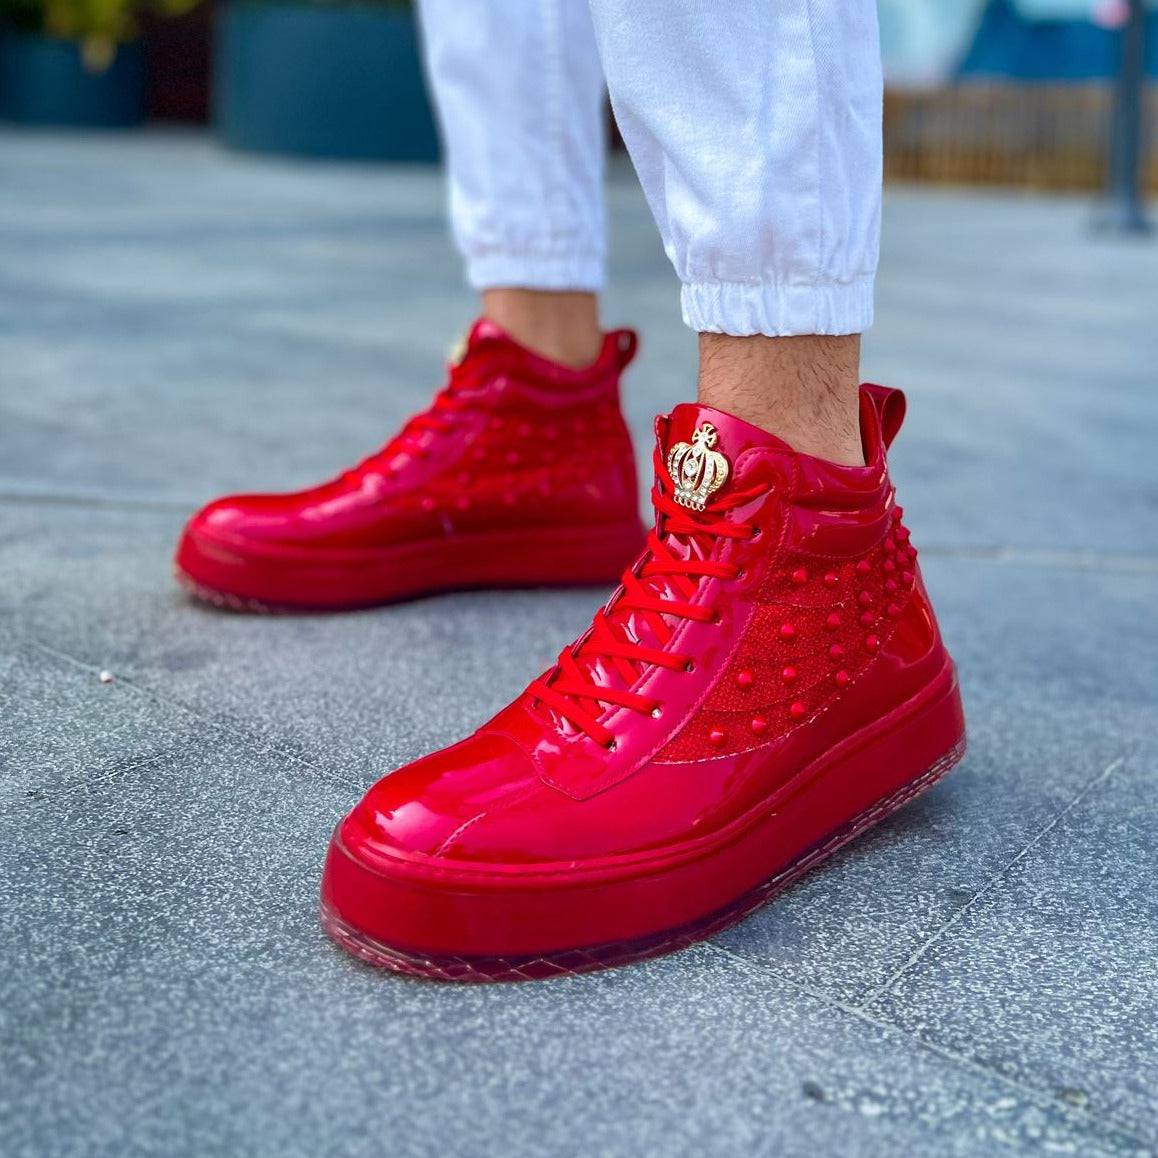 Men's Royal in All Red